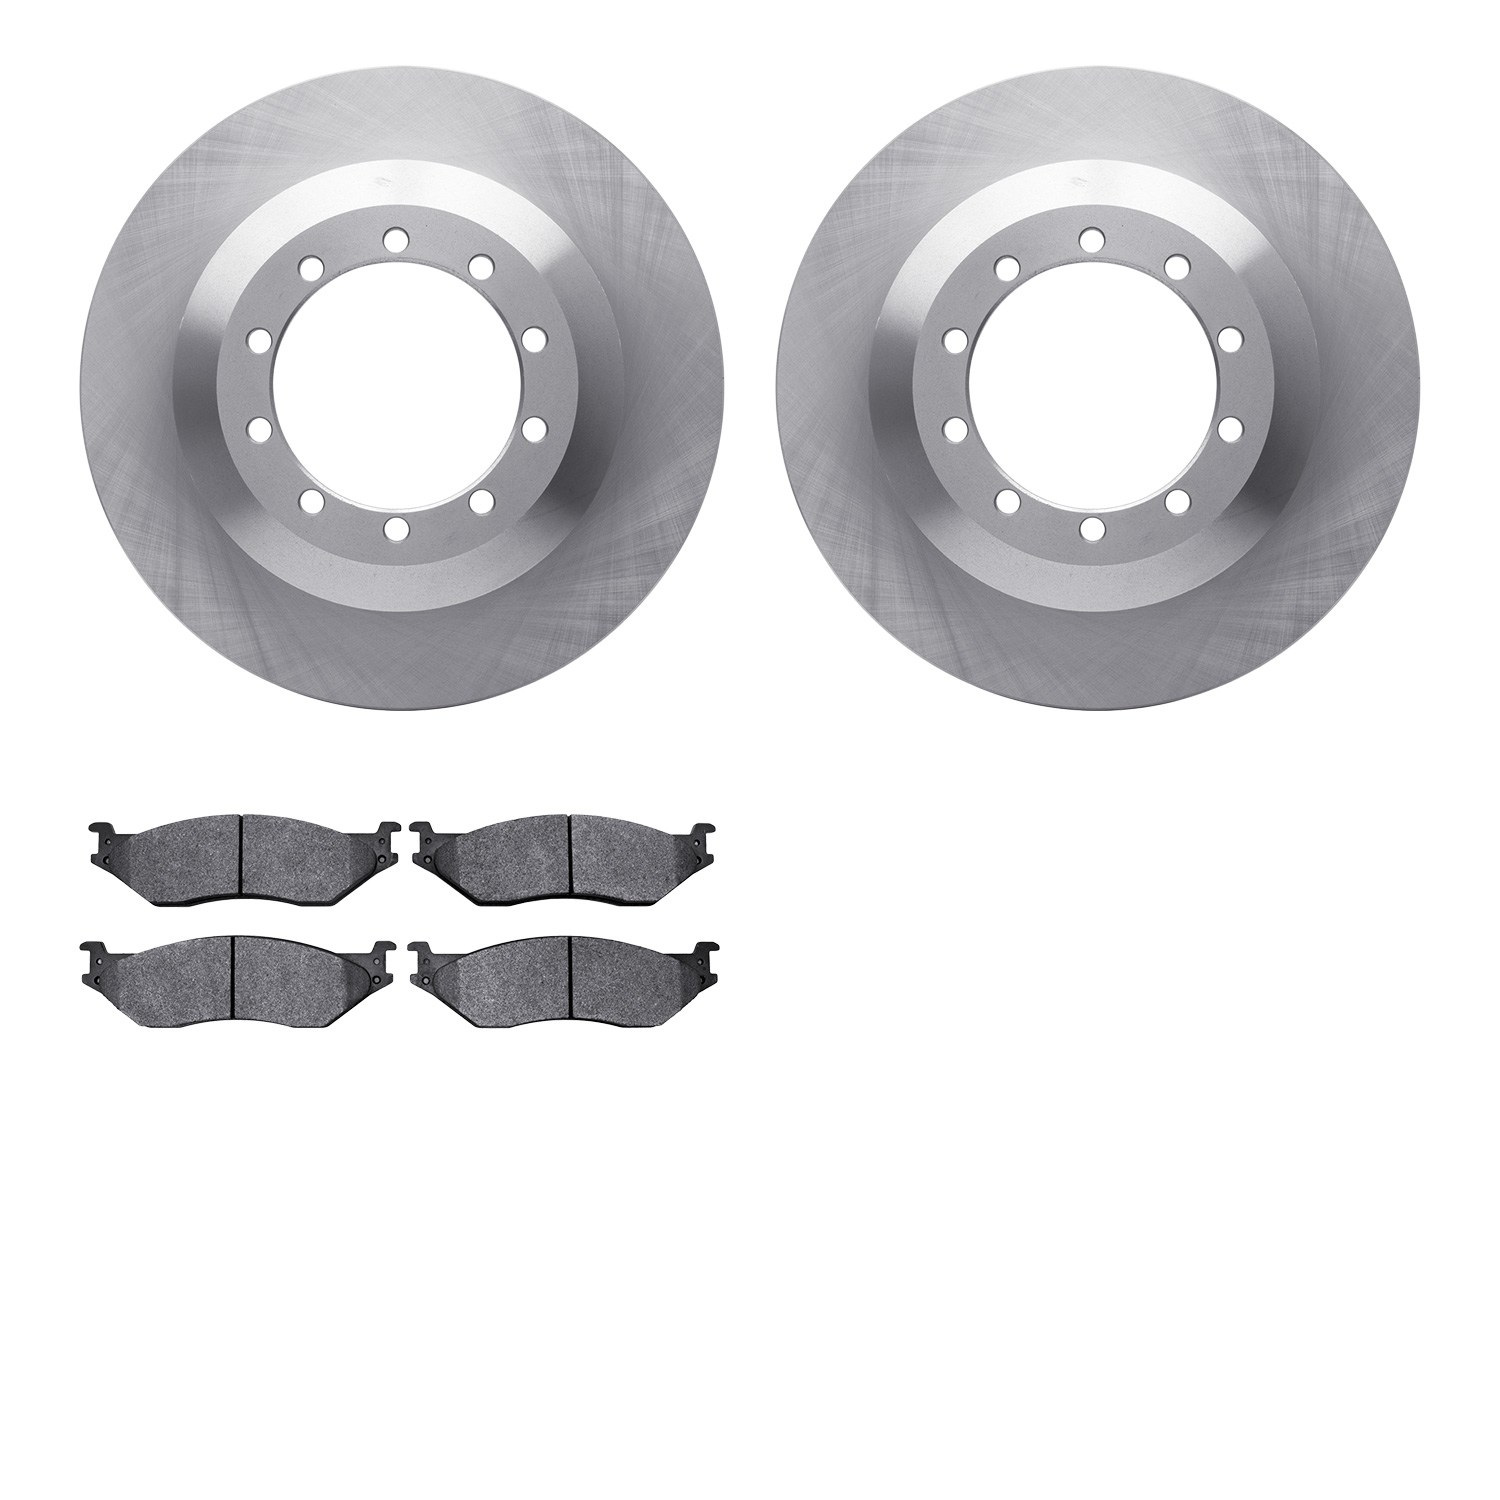 6402-54198 Brake Rotors with Ultimate-Duty Brake Pads, 2011-2015 Ford/Lincoln/Mercury/Mazda, Position: Rear